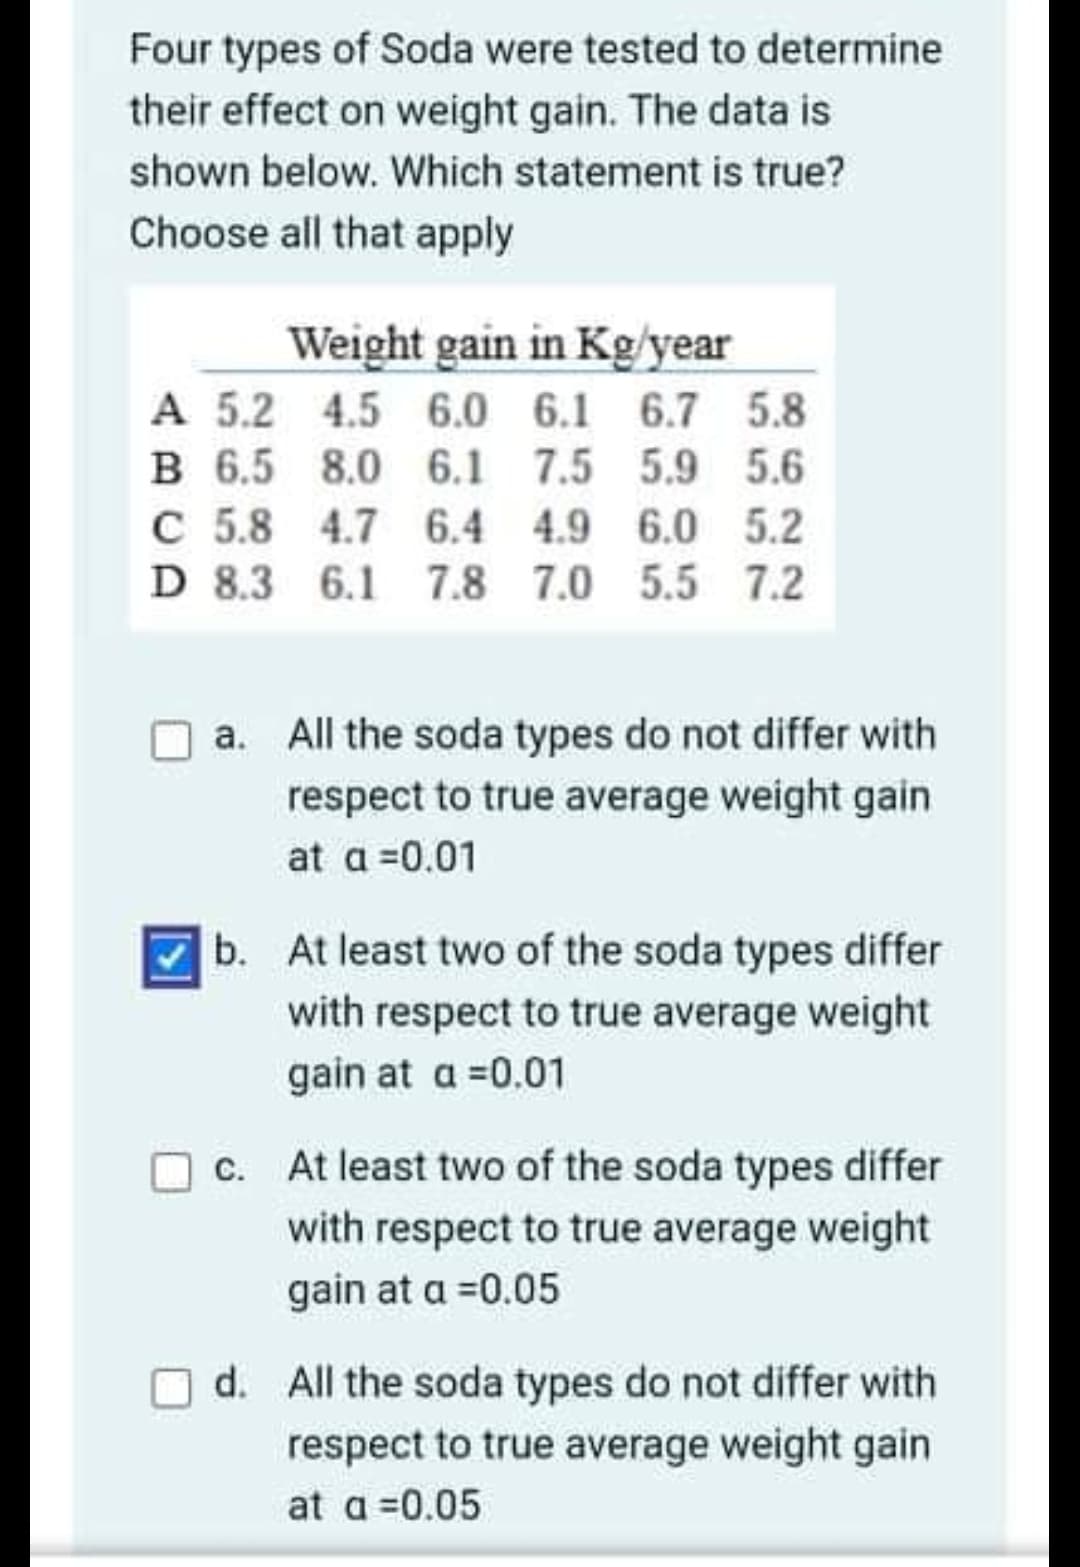 Four types of Soda were tested to determine
their effect on weight gain. The data is
shown below. Which statement is true?
Choose all that apply
Weight gain in Kg/year
A 5.2
4.5 6.0 6.1 6.7 5.8
B 6.5 8.0 6.1 7.5 5.9 5.6
C 5.8 4.7 6.4 4.9 6.0 5.2
D 8.3 6.1 7.8 7.0
7.8 7.0 5.5 7.2
a. All the soda types do not differ with
respect to true average weight gain
at a =0.01
b. At least two of the soda types differ
with respect to true average weight
gain at a =0.01
c. At least two of the soda types differ
with respect to true average weight
gain at a =0.05
d. All the soda types do not differ with
respect to true average weight gain
at a =0.05